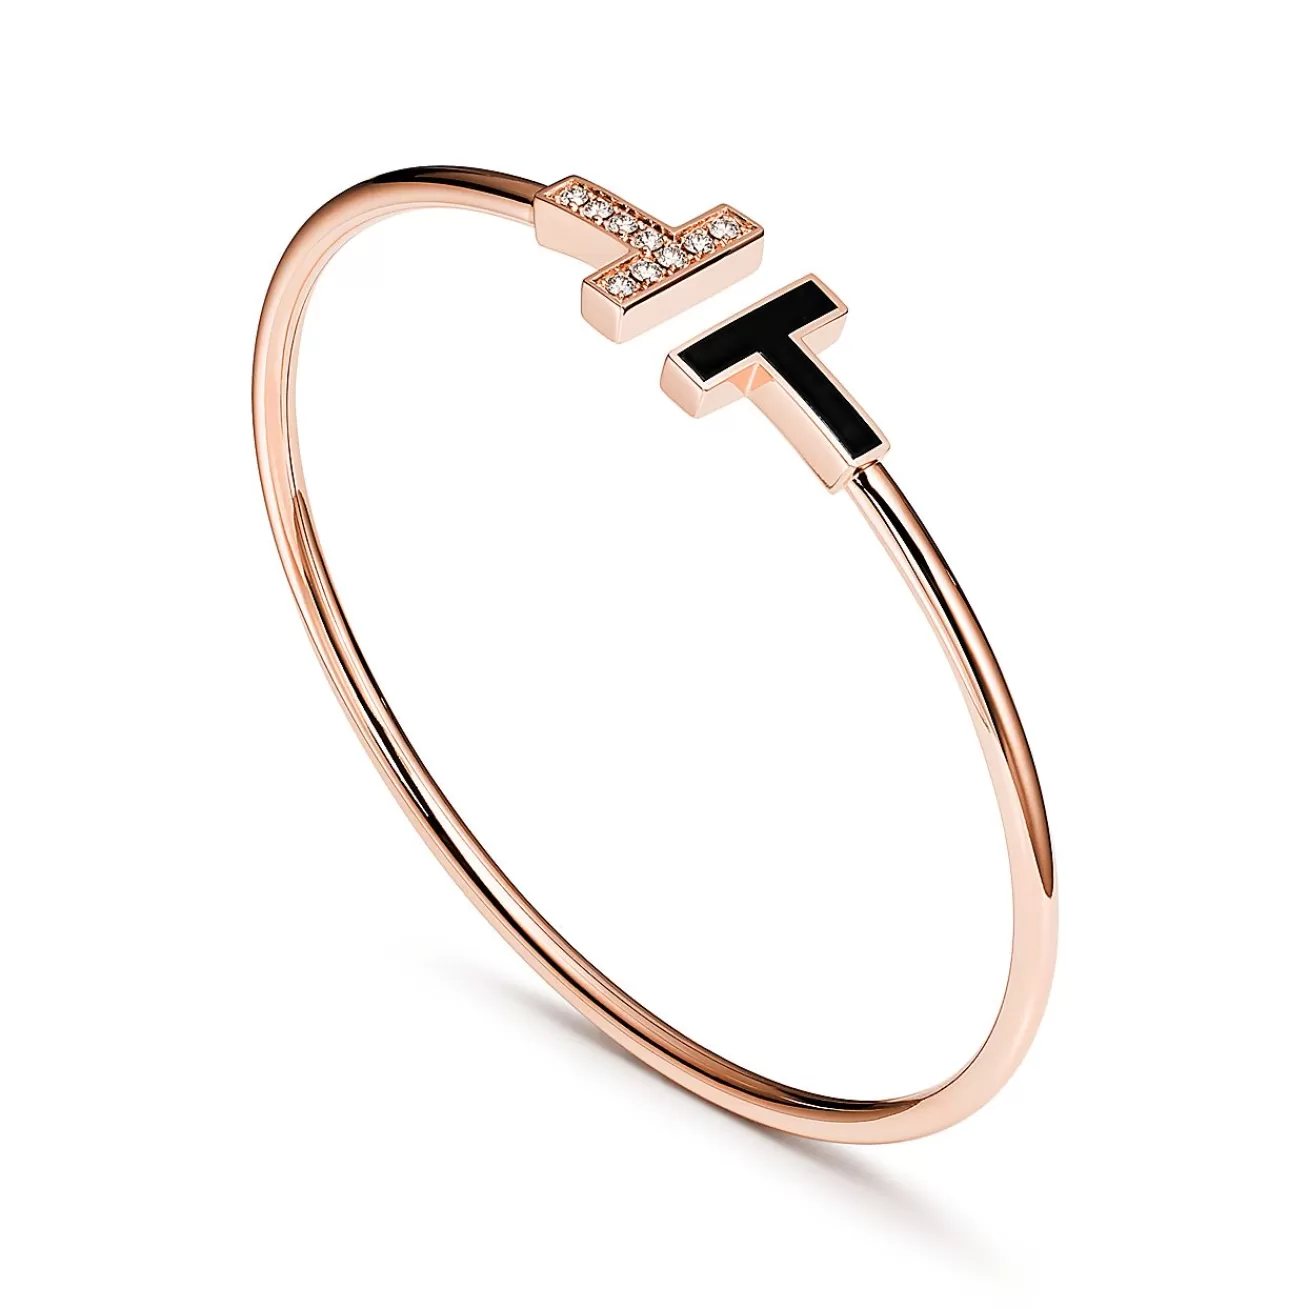 Tiffany & Co. Tiffany T Wire Bracelet in Rose Gold with Black Onyx and Diamonds | ^ Bracelets | Rose Gold Jewelry